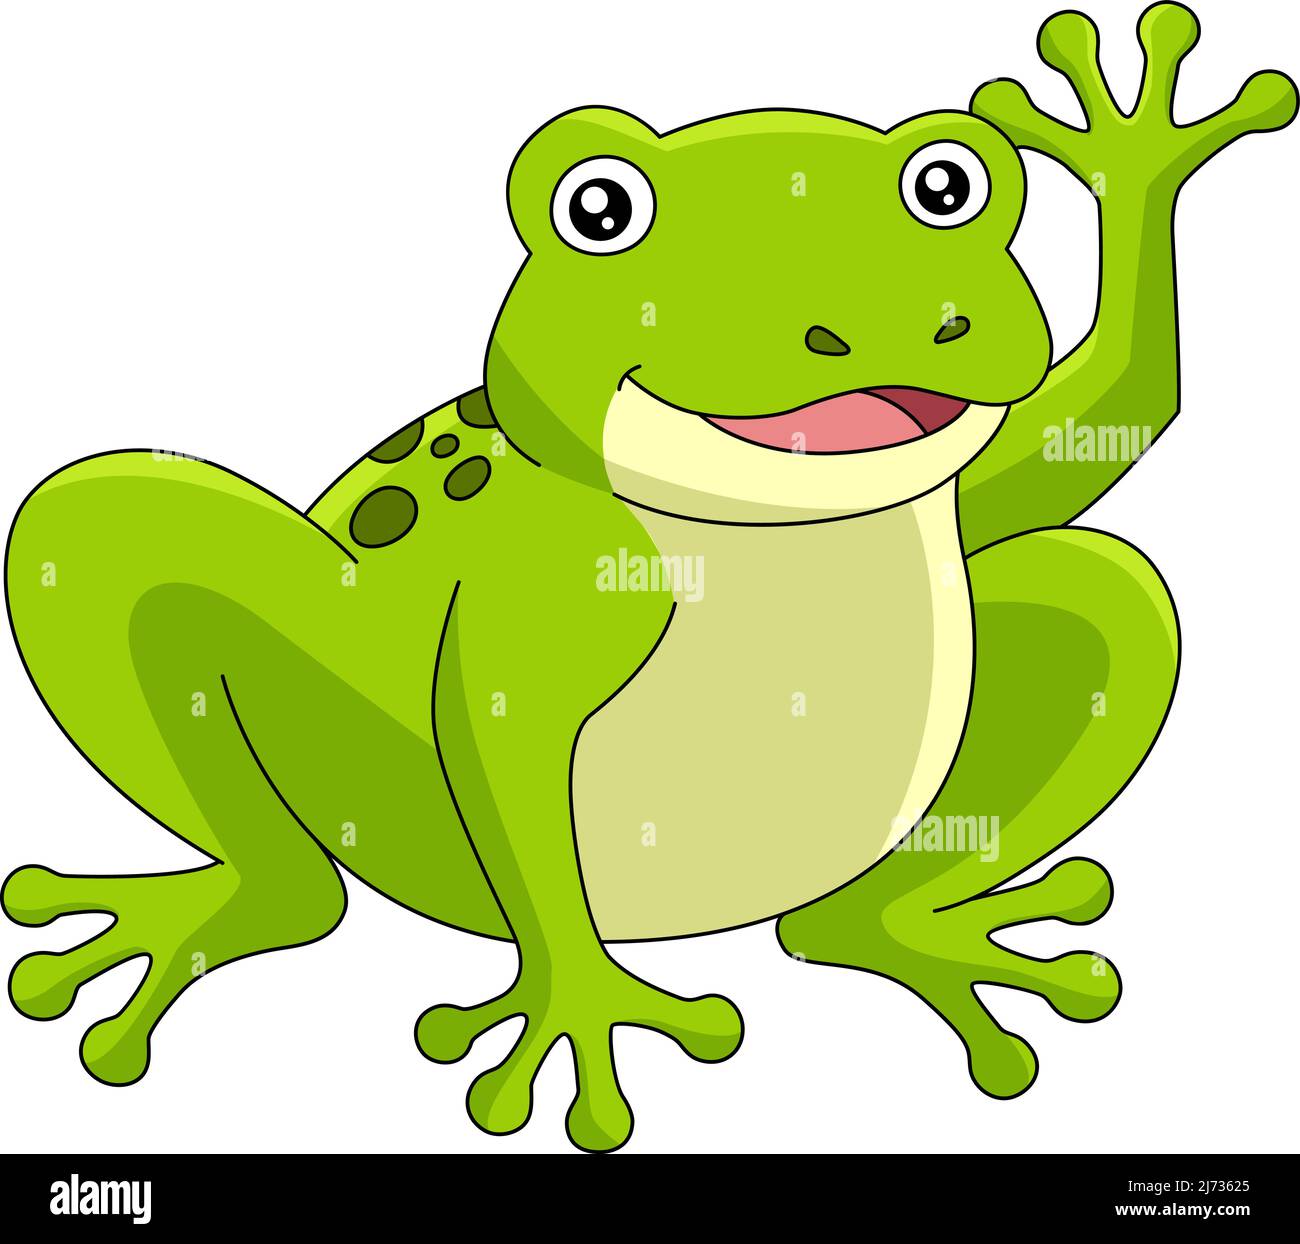 Frog Cartoon Colored Clipart Illustration Stock Vector Image & Art ...